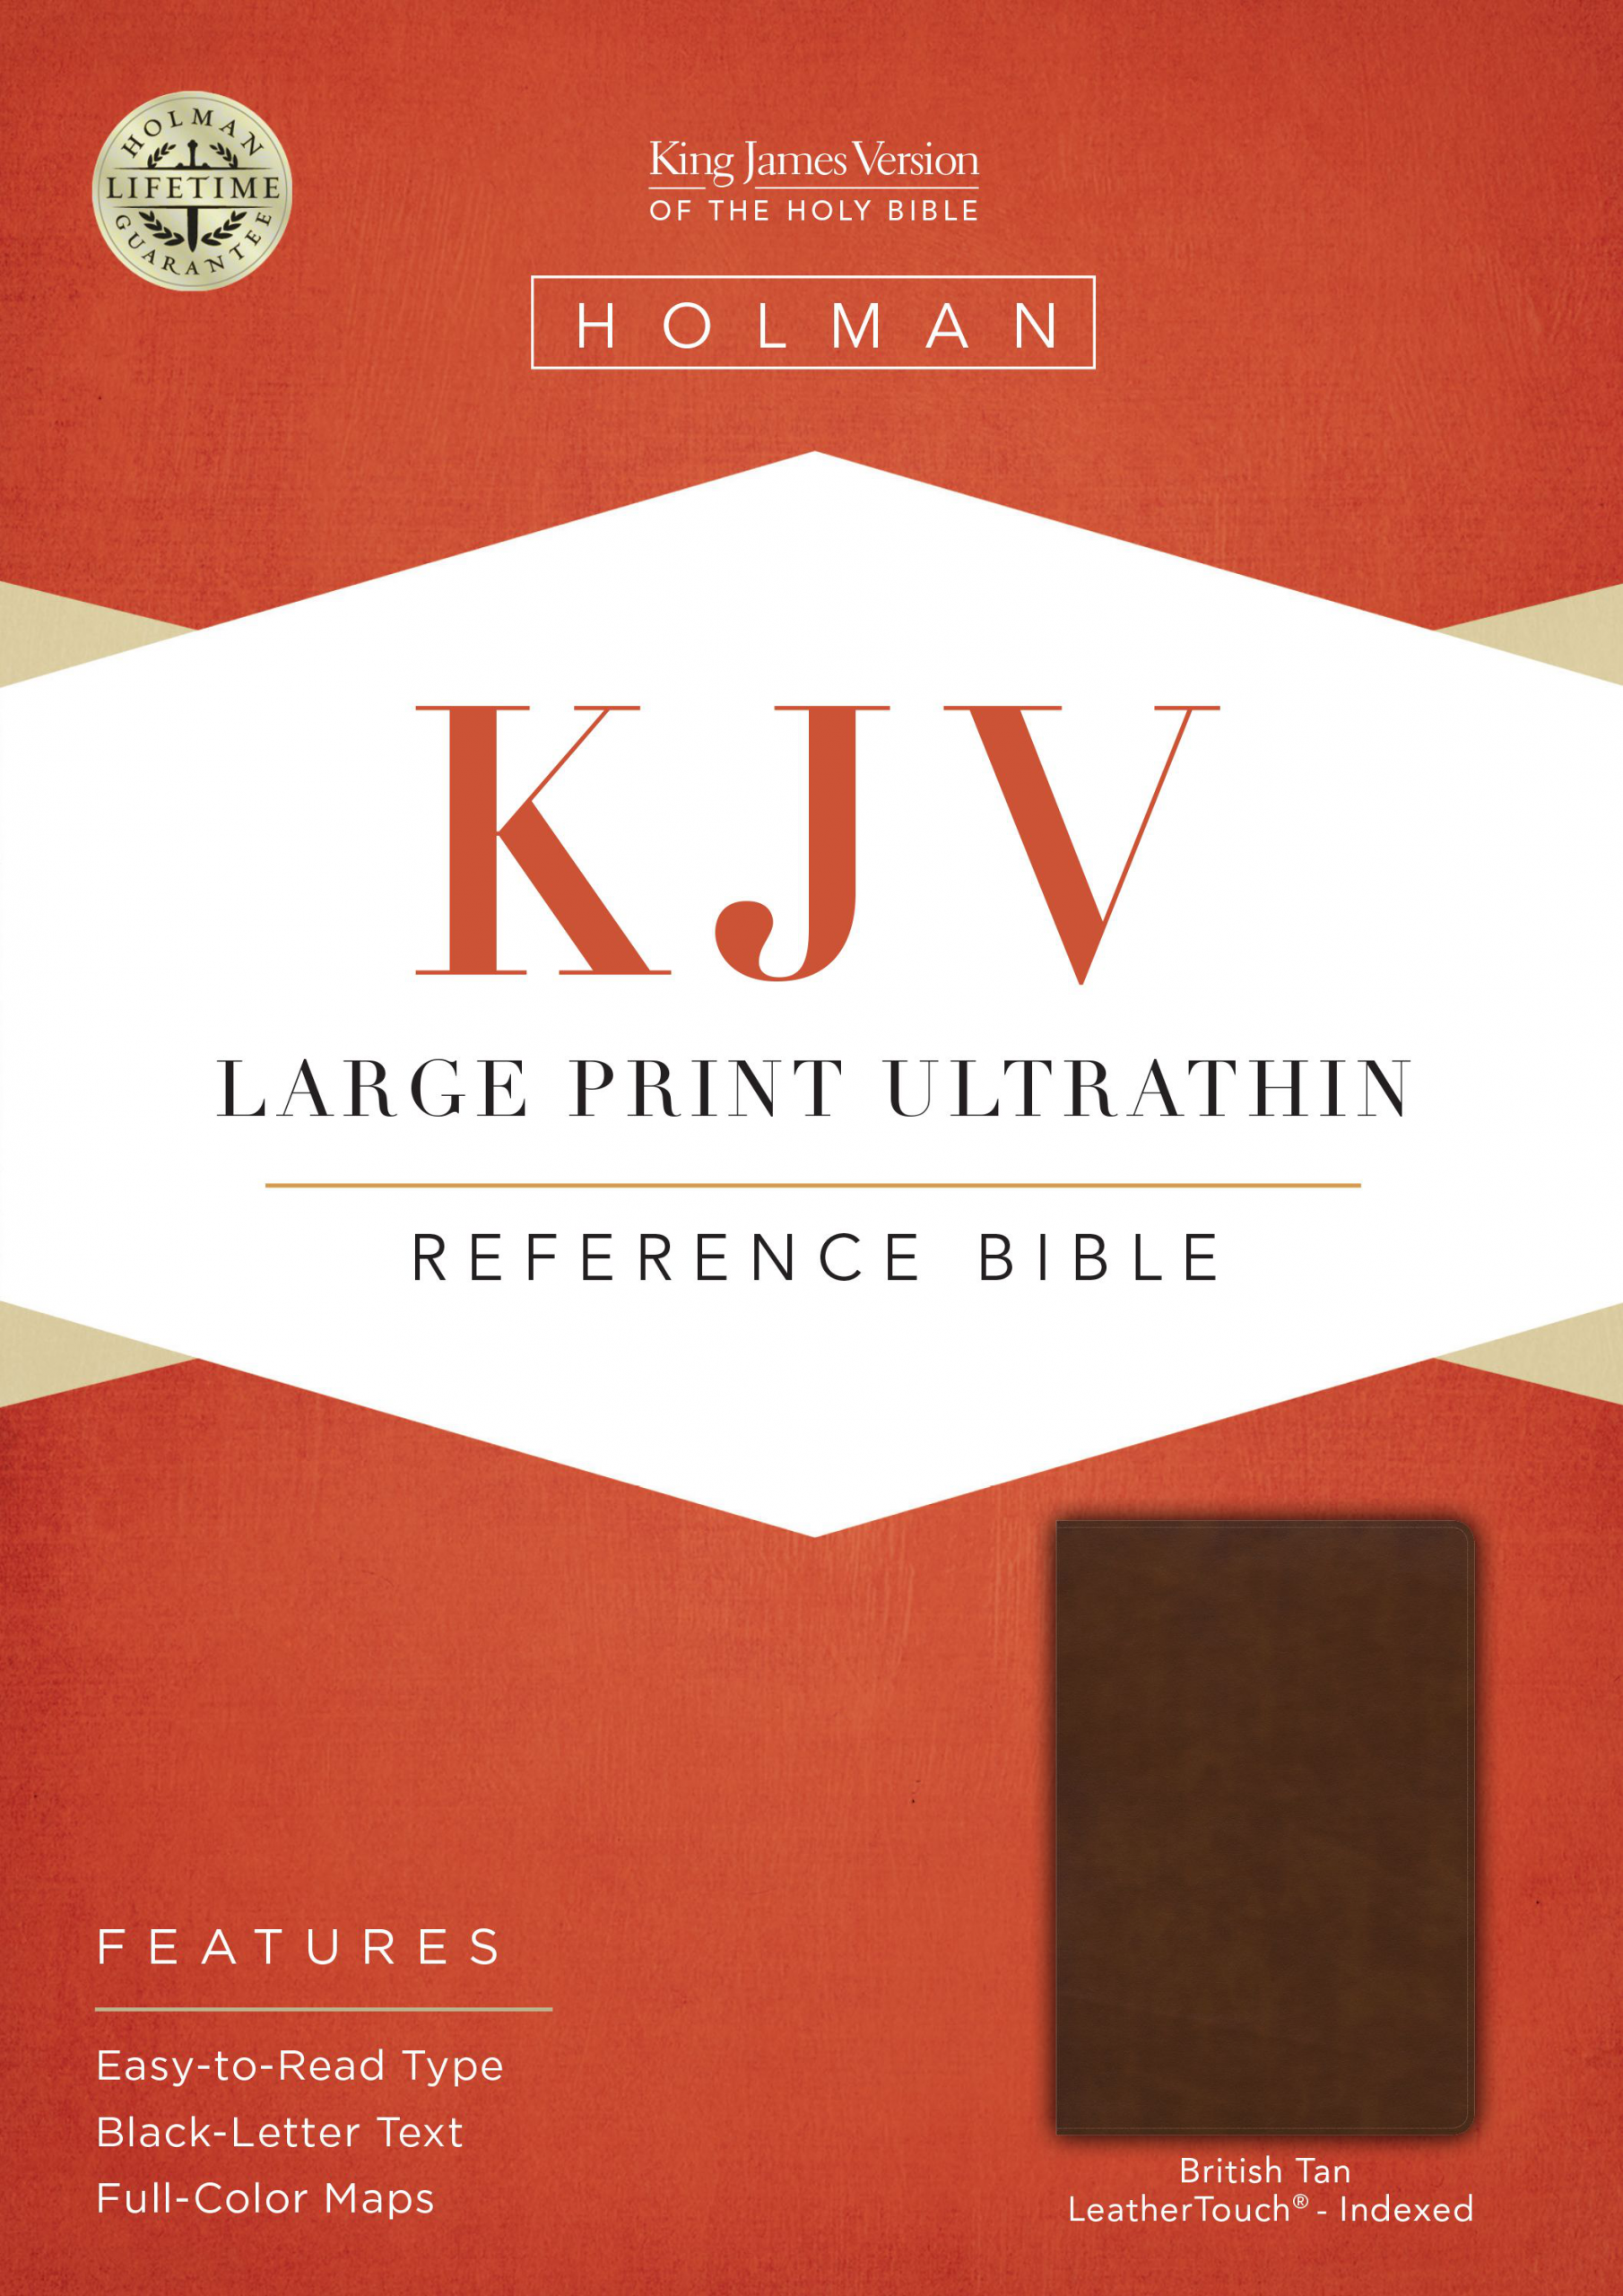 KJV Large Print Ultrathin Reference Bible, British Tan LeatherTouch, Indexed, Black Letter Edition